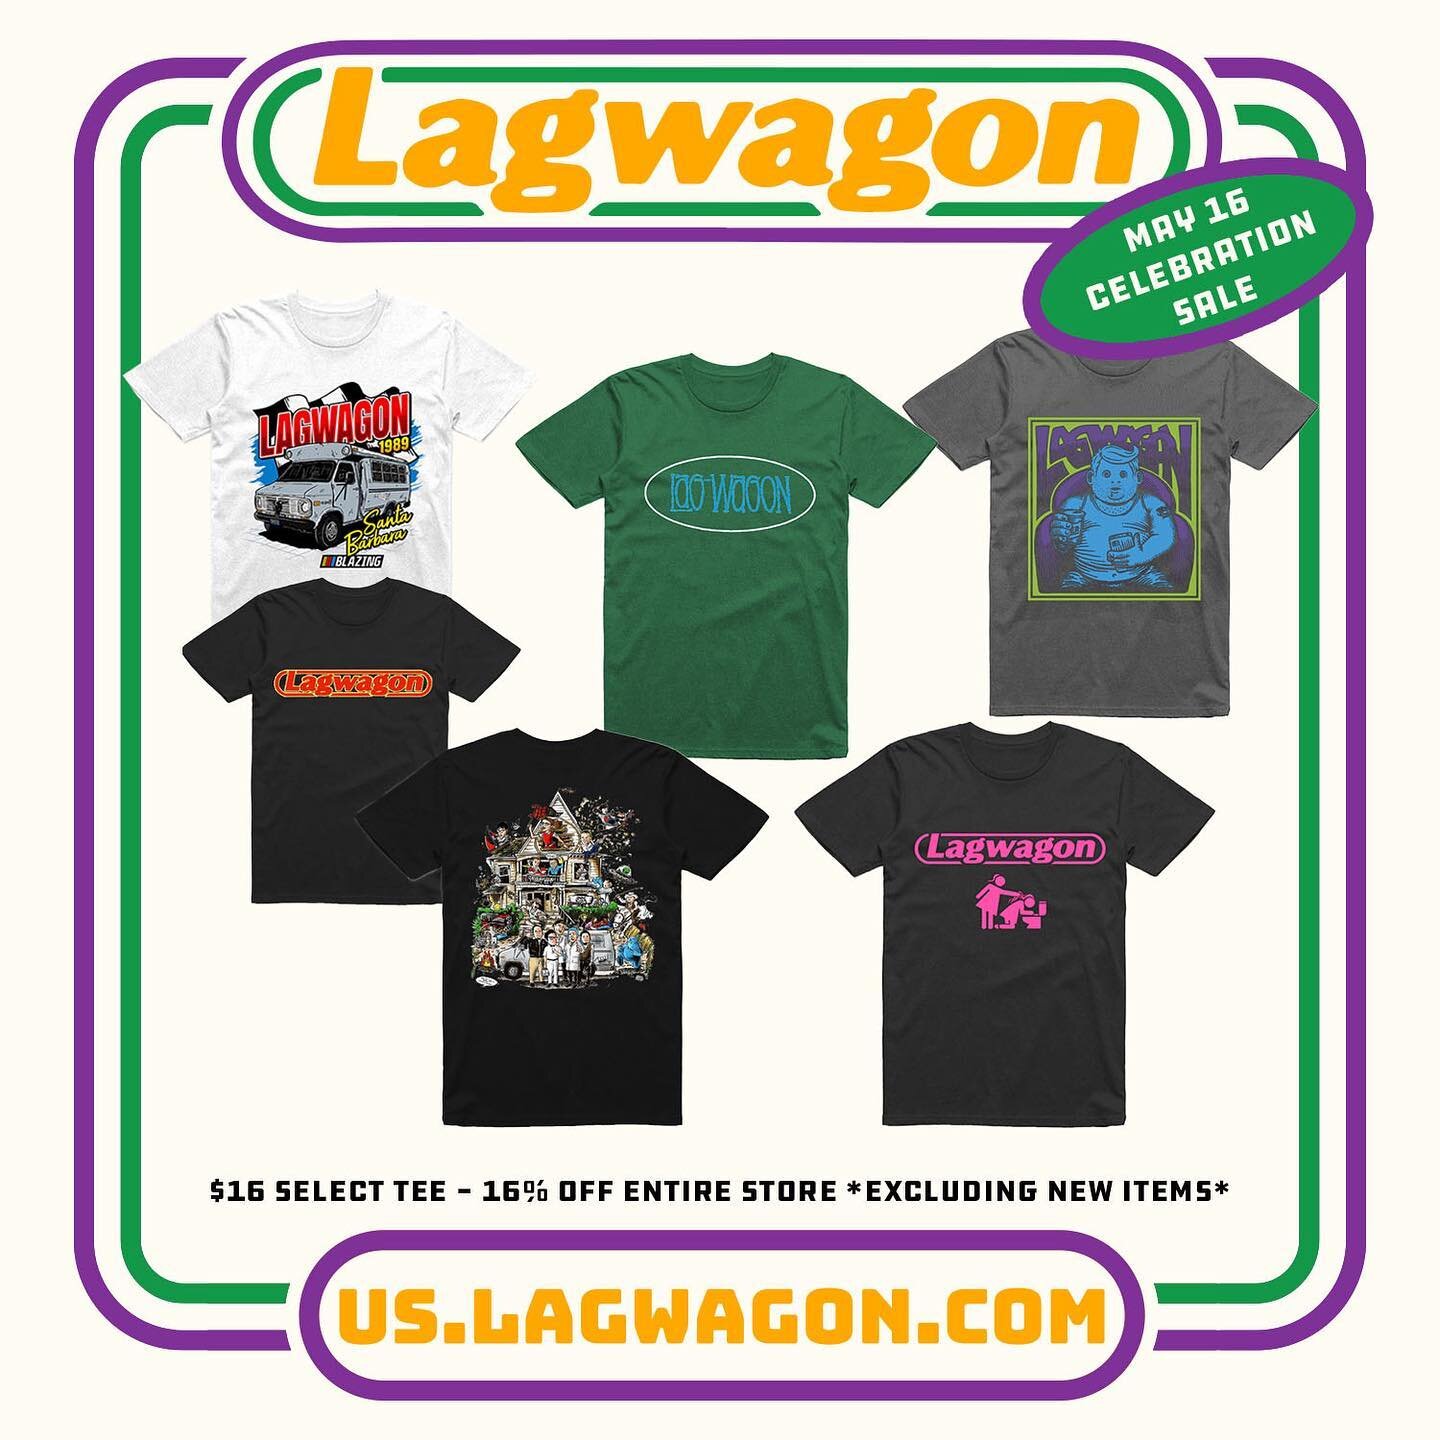 HAPPY MAY 16th!! 🎉🍾🎈🤘🏽✨💥 Thanks to everyone for your great posts celebrating Lagwagon Day, you guys are the BEST!!! 🖤 Hope to see many of you this summer (and beyond) on tour. Also just a heads up that our US merch store is celebrating today w